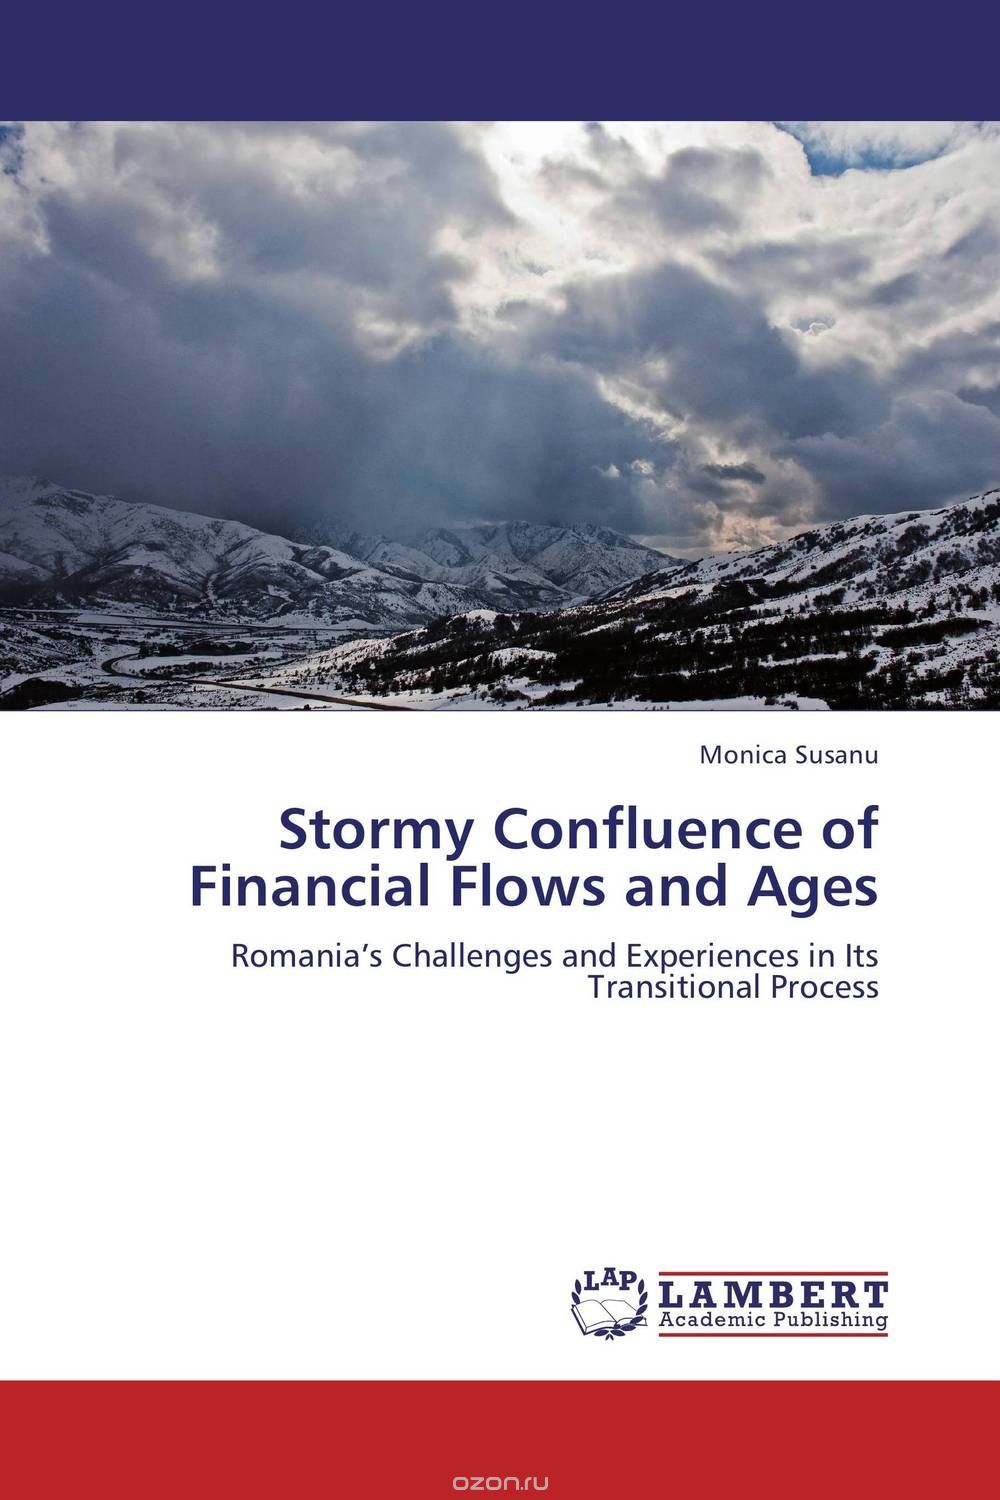 Stormy Confluence of Financial Flows and Ages